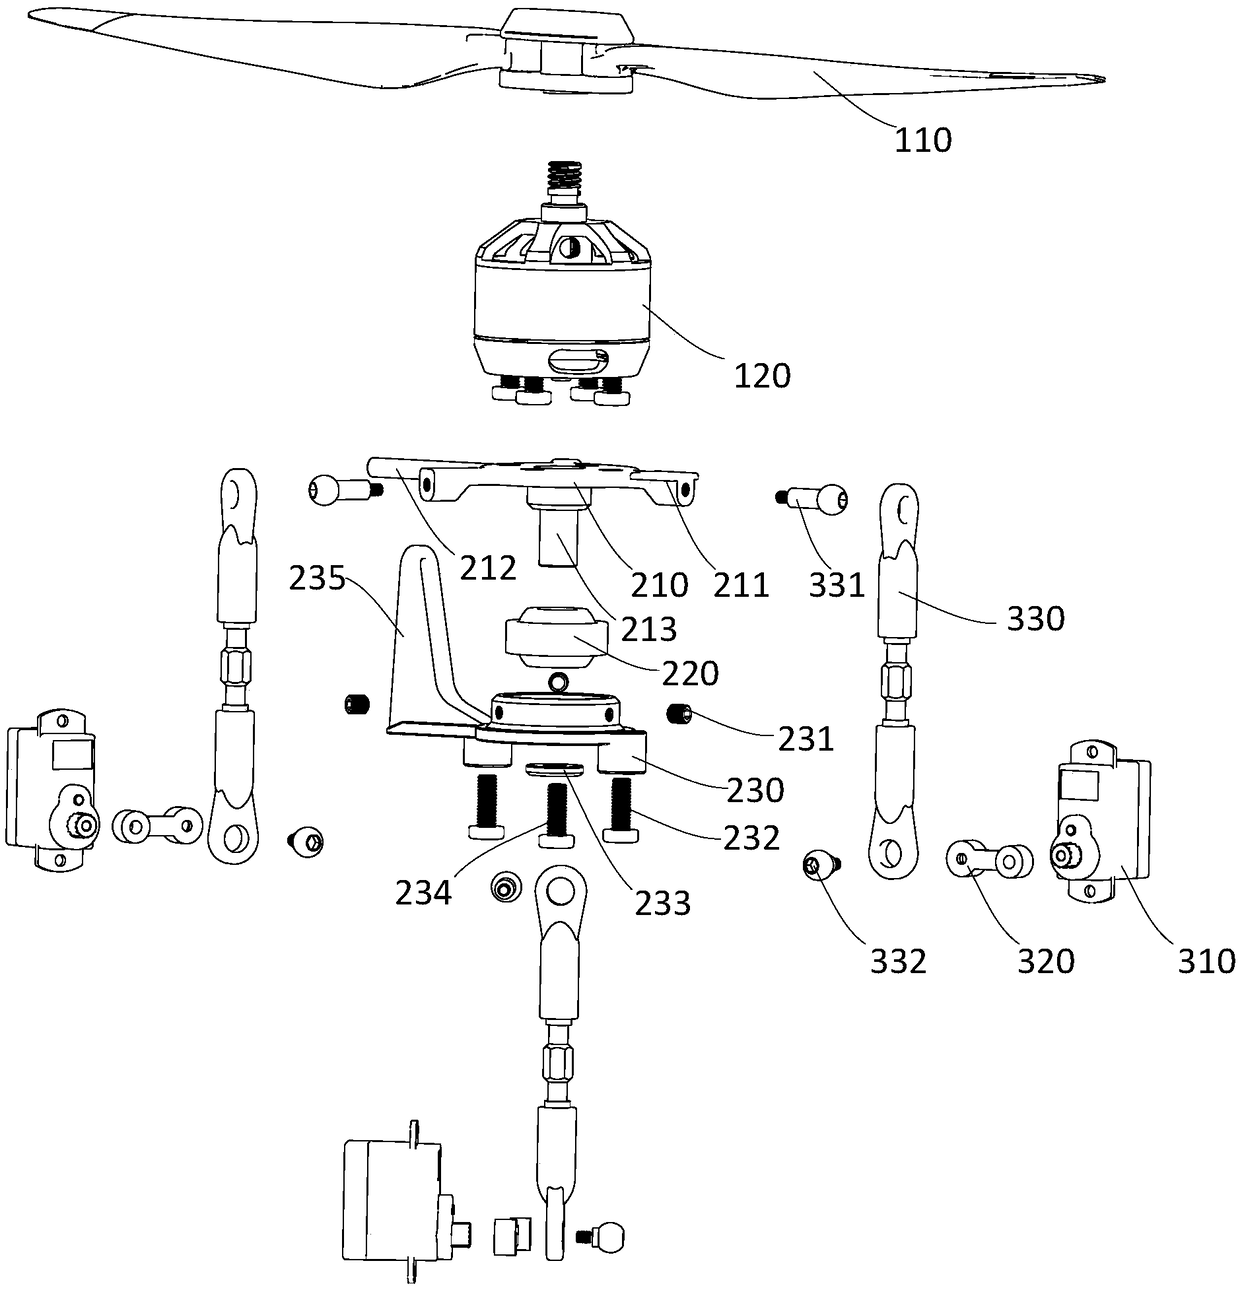 An unmanned aerial vehicle rotor structure and an unmanned aerial vehicle